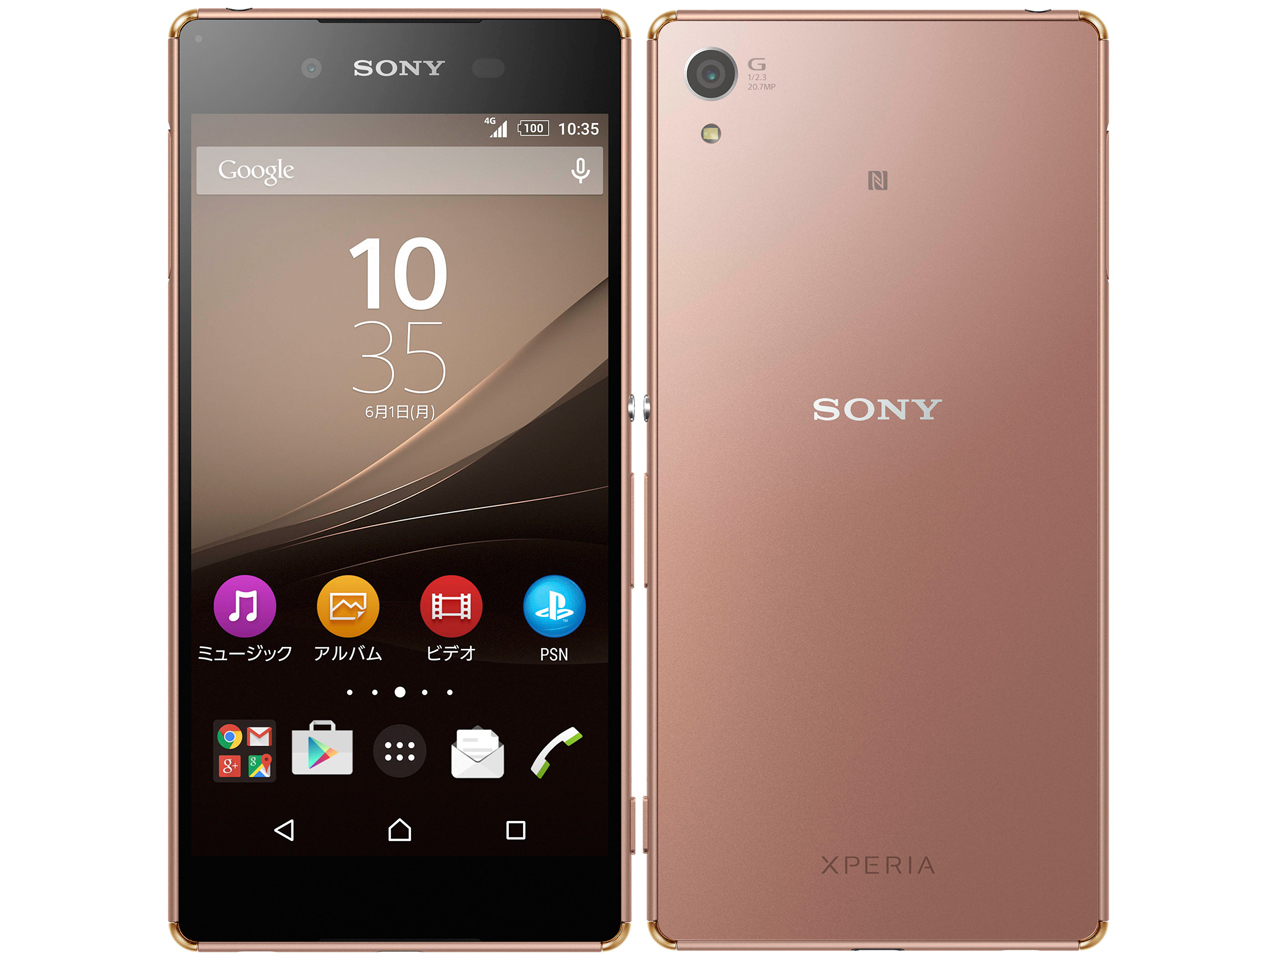 Xperia Z4 SoftBank [カッパー]